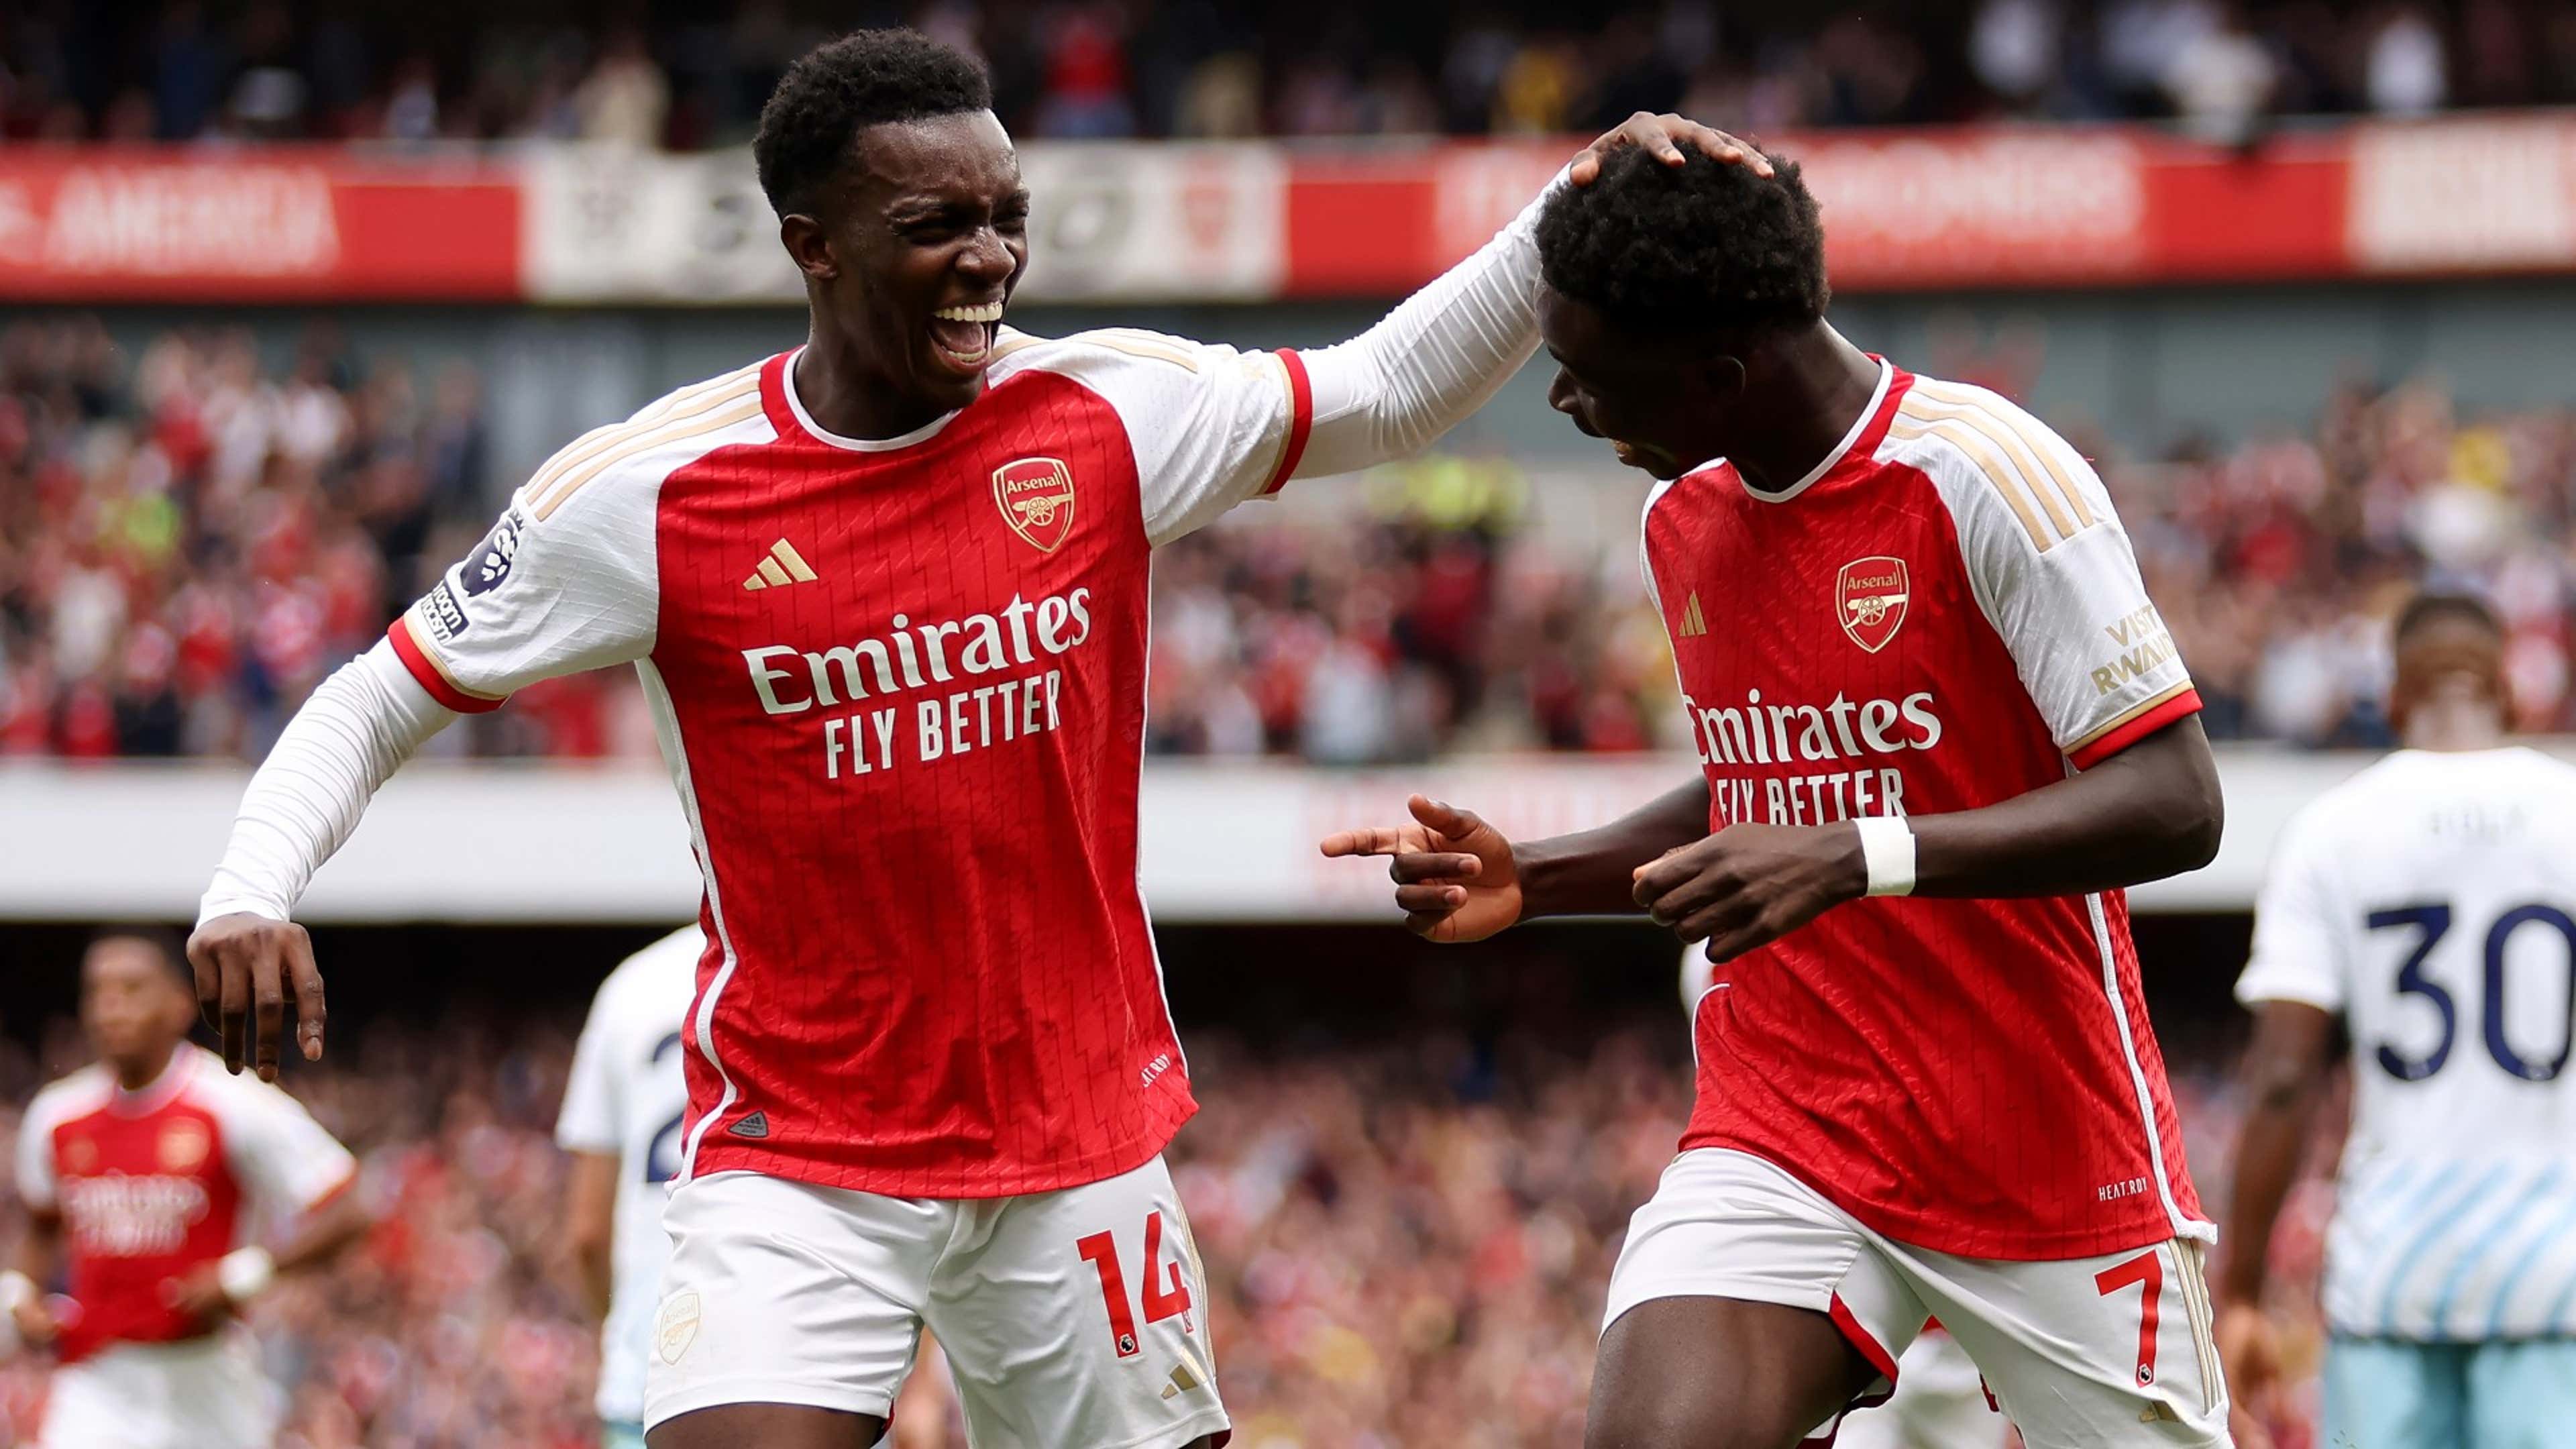 Arsenal vs. Crystal Palace: Date, time, live stream, match preview and how  to watch